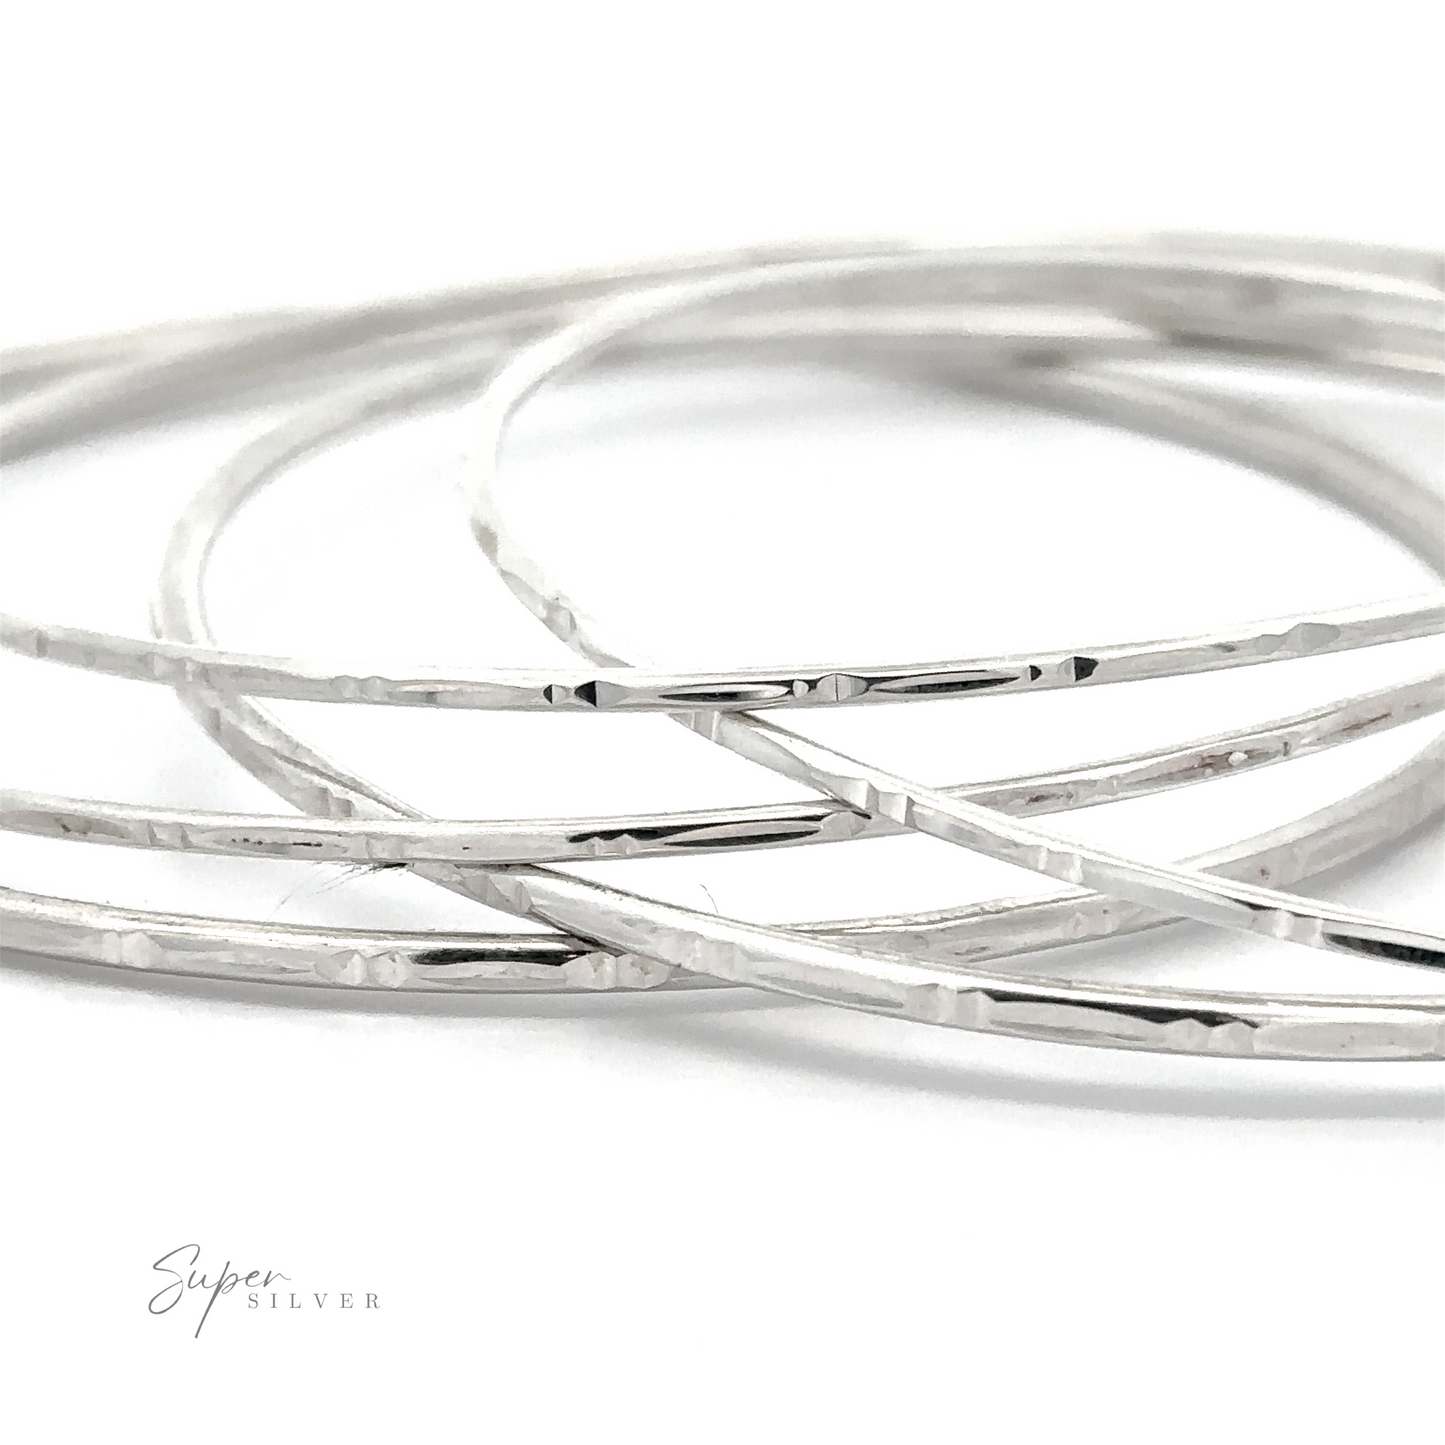 Close-up of several thin, textured, sterling silver bangles overlapping each other. "Sparkling Faceted Bangle Bracelet" is written in small print in the bottom left corner.